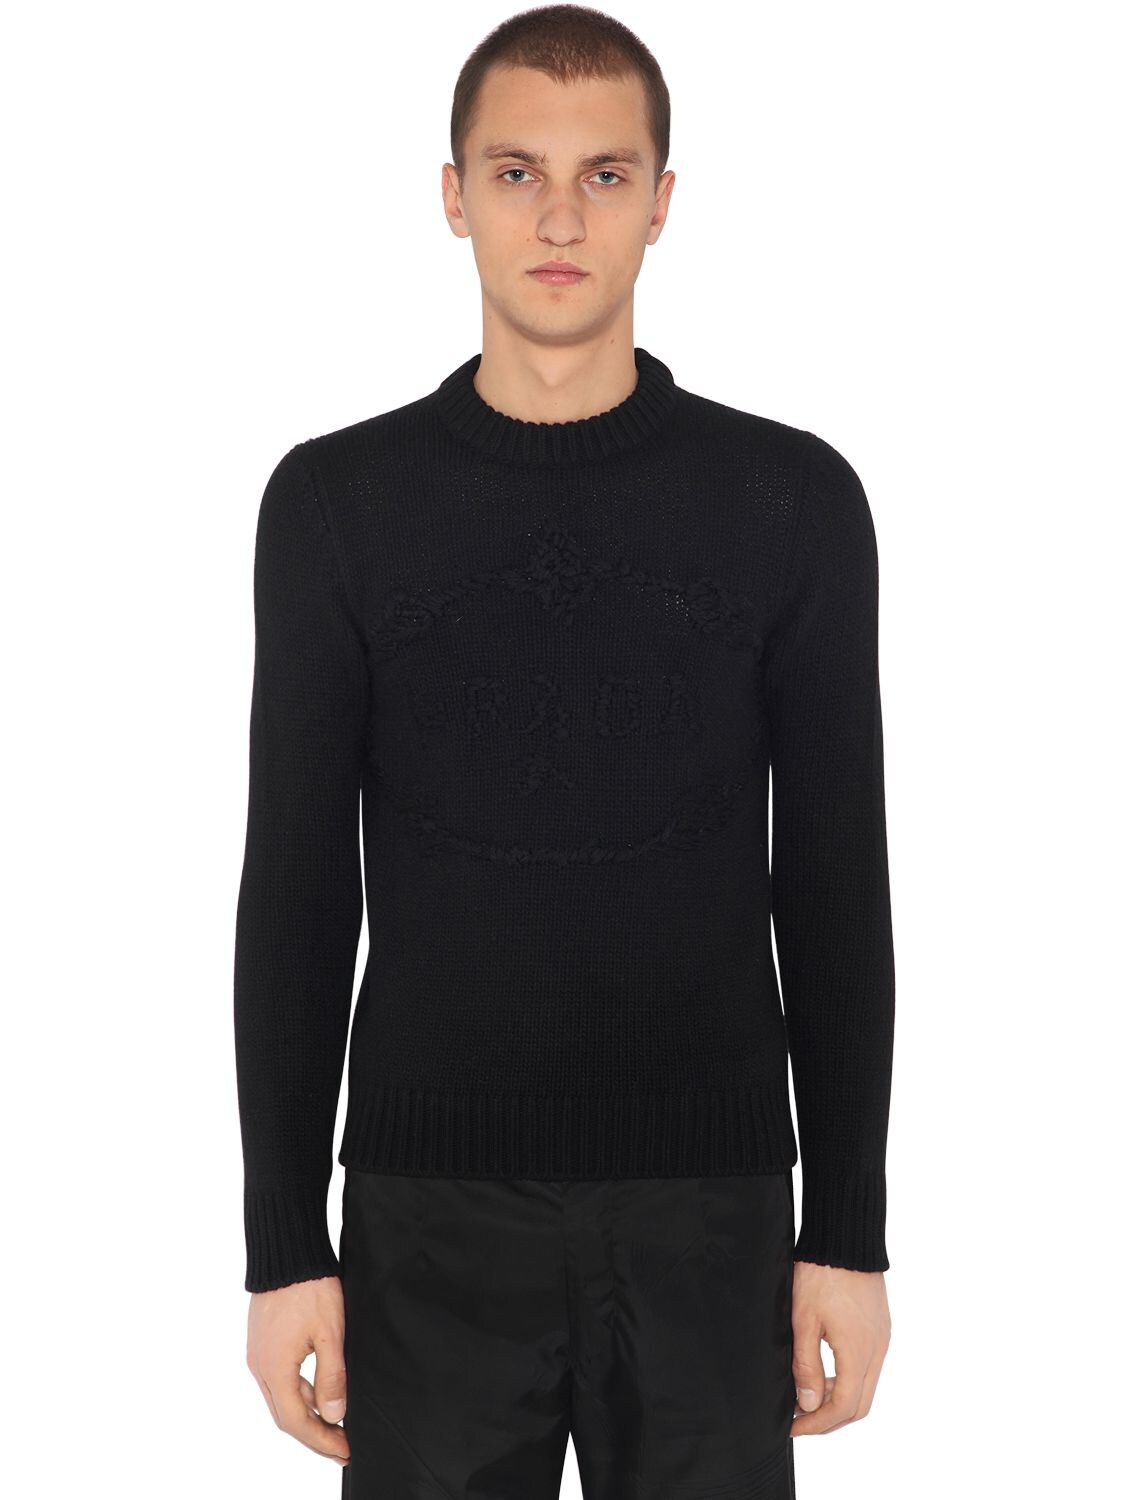 Prada Embroidered Wool & Cashmere Knit Sweater In Black